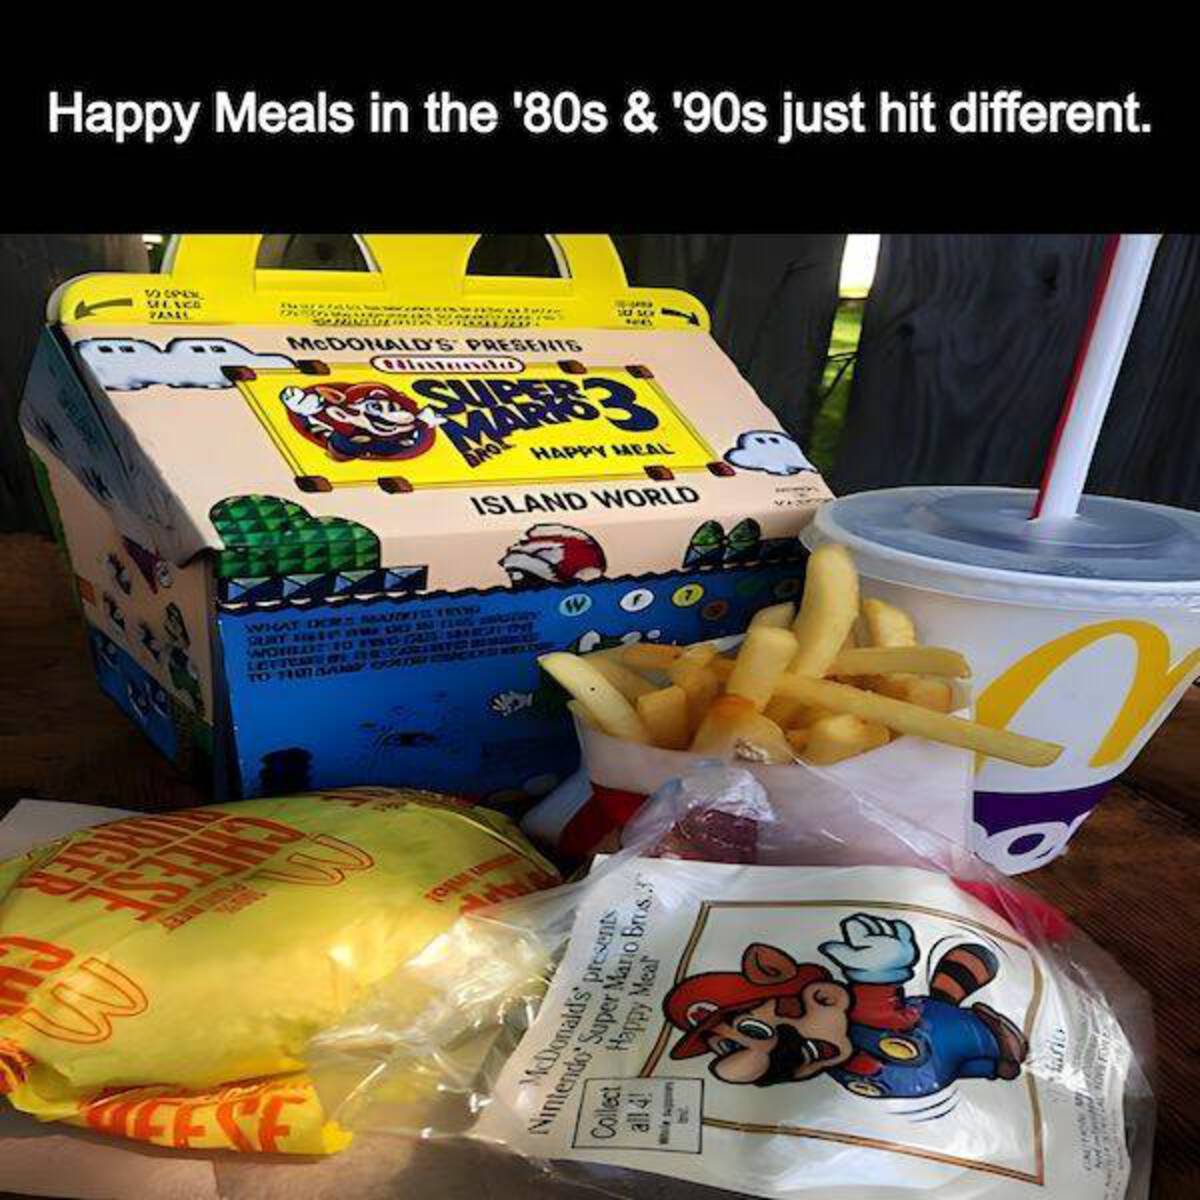 kids' meal - Cese Happy Meals in the '80s & '90s just hit different. 13220 2. Mcdonald'S Presents Clando Super Gro Happy Meal Island World What Ders Markestrog Gerry Vinson Flo ray Worber Ed Fang Gabismigreine Late France Of Regeschorenster Hemele To Rmsa